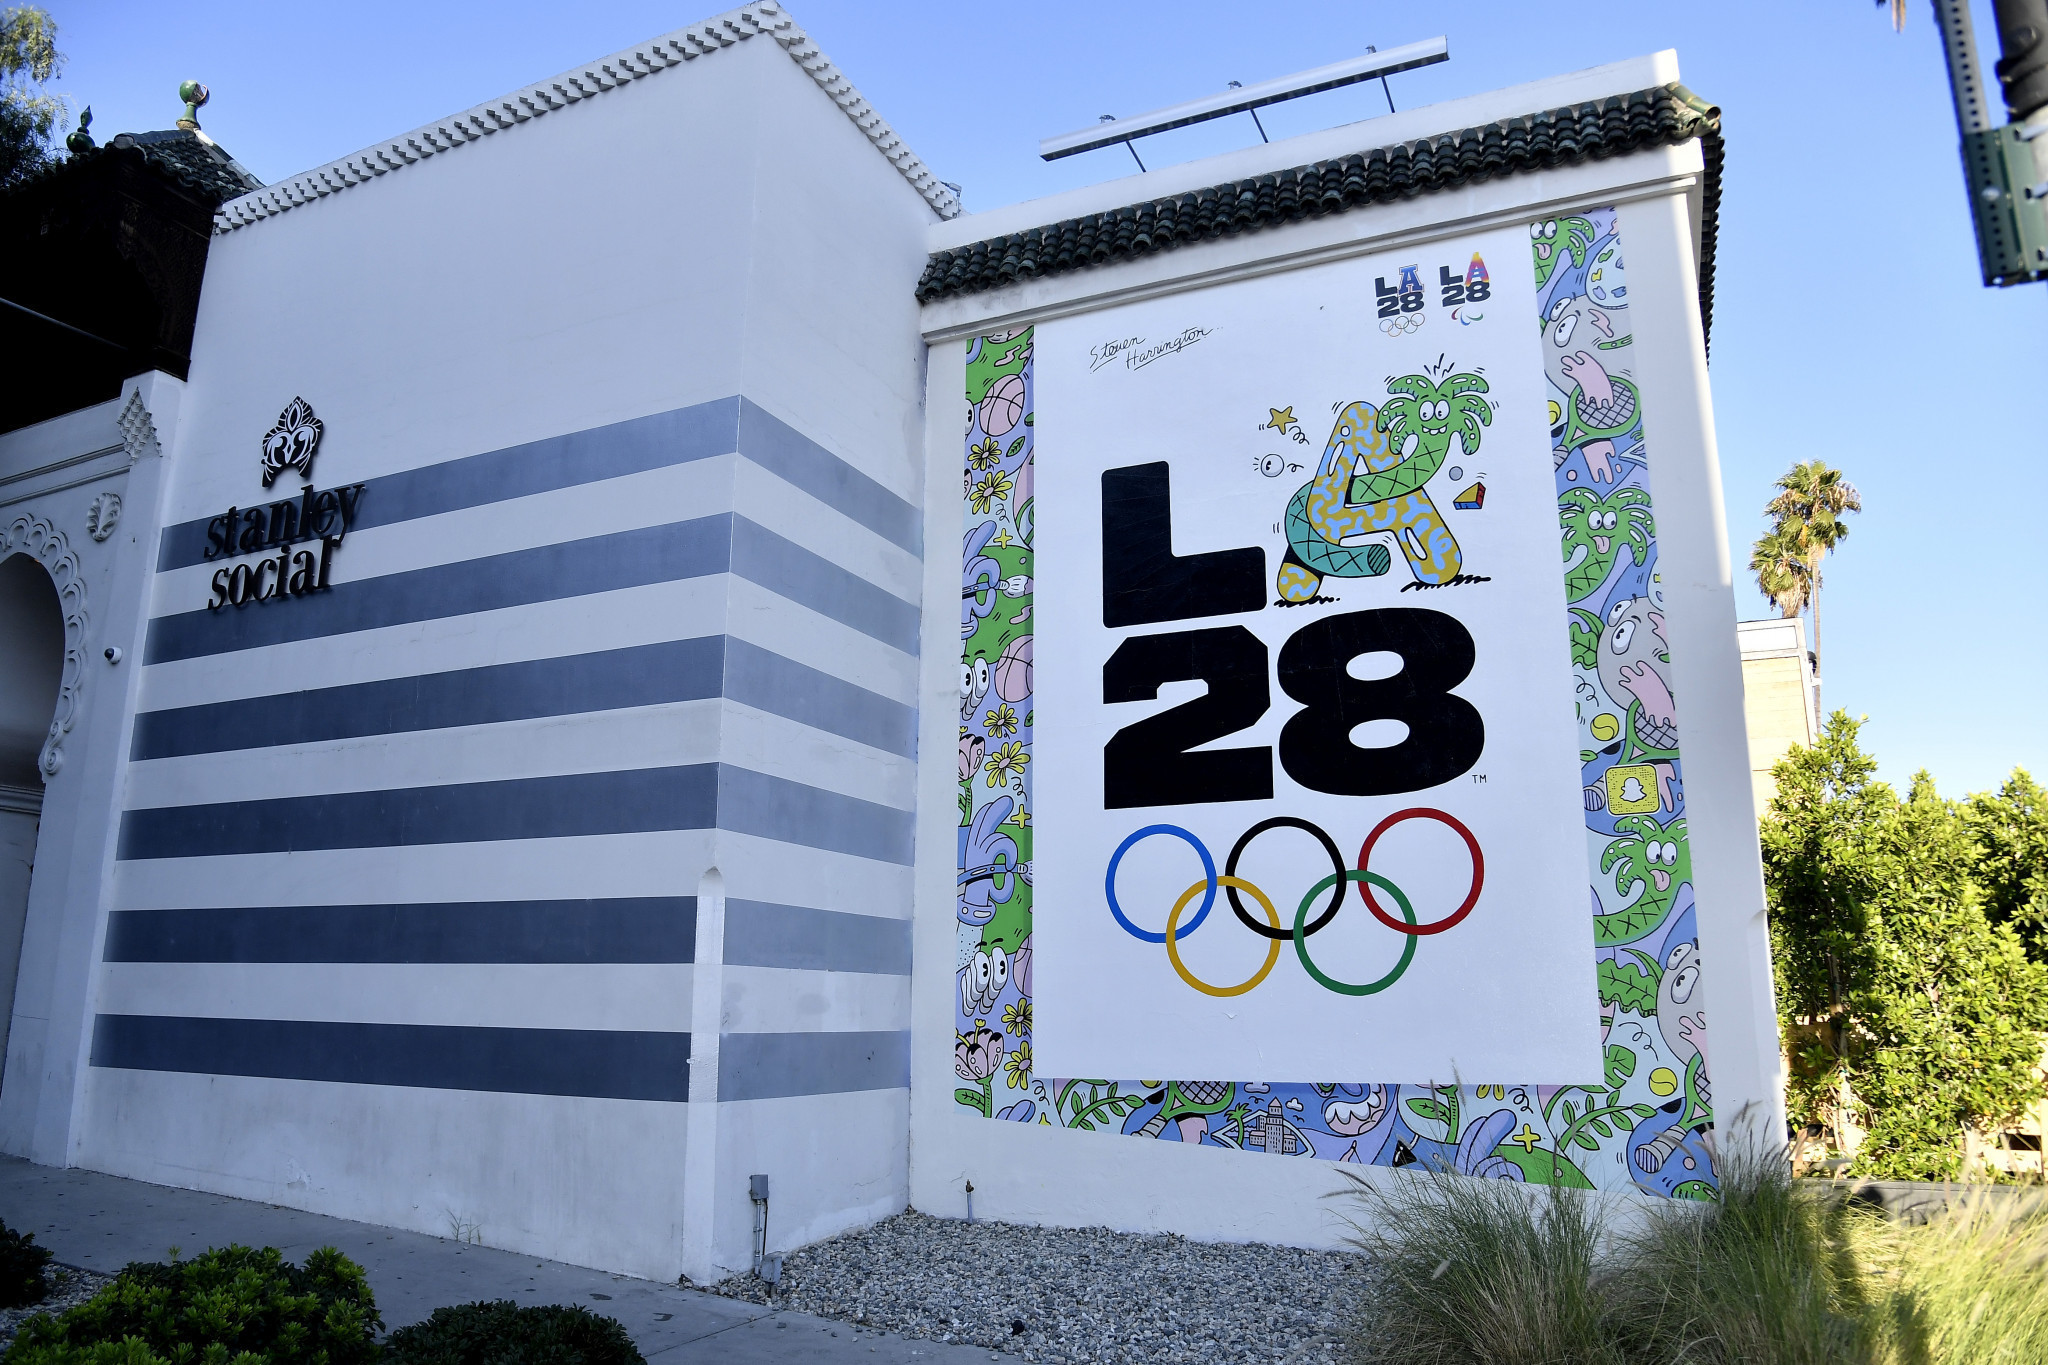 Los Angeles Council votes to join safety Cooperative for 2028 Games despite dissenting voices